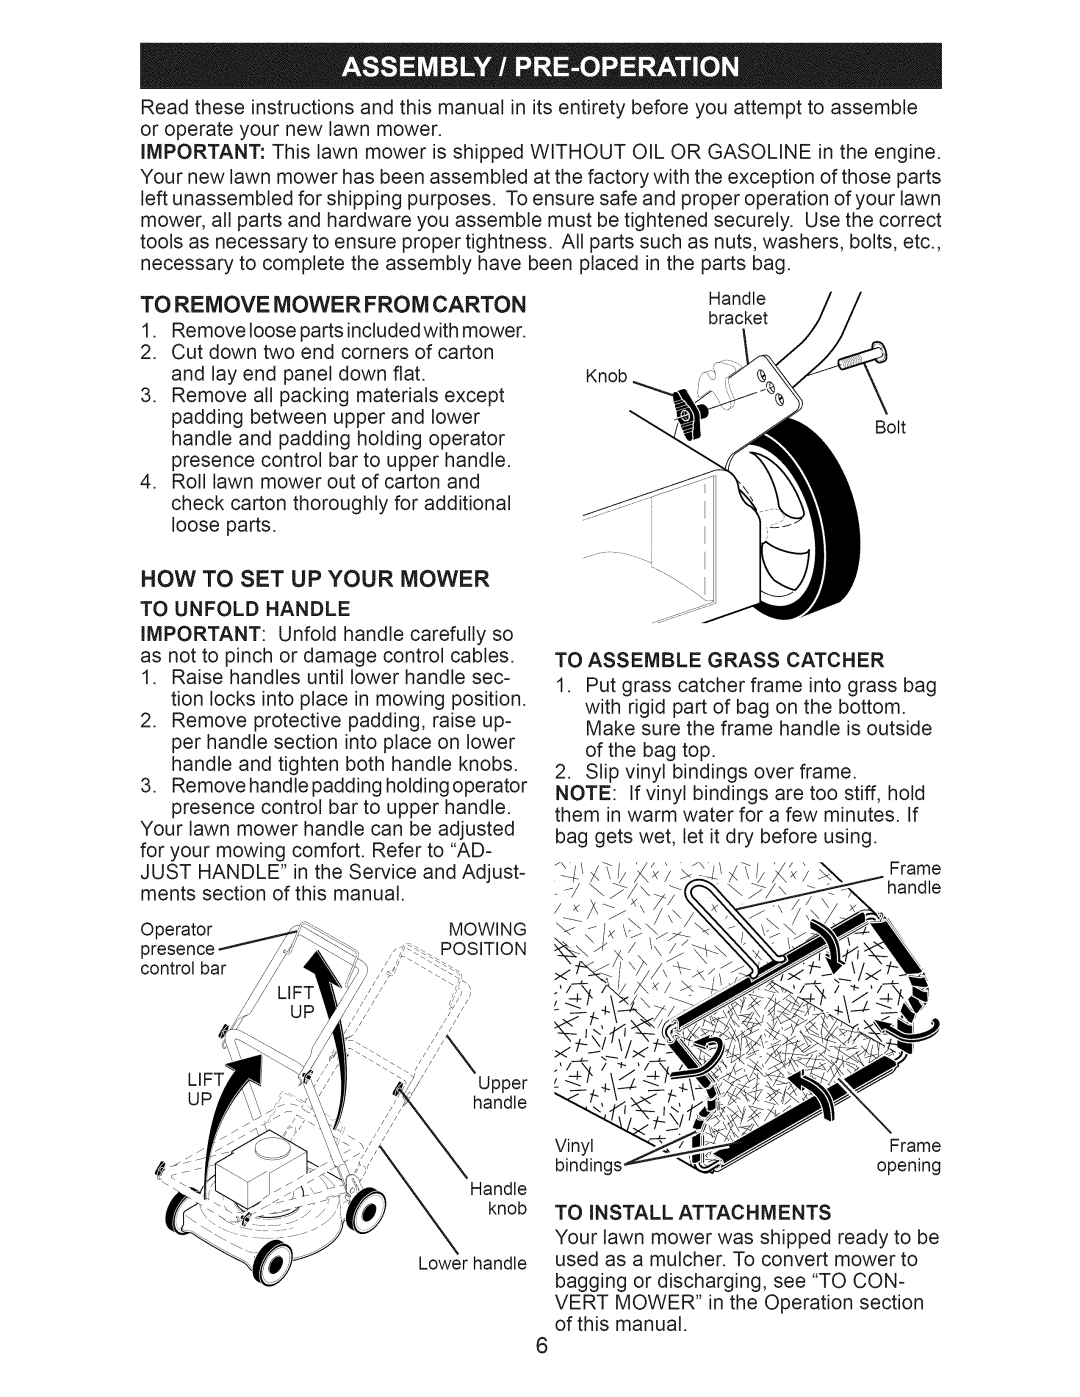 Craftsman 917.376234 manual To Remove Mower From Carton, Now To Set Up Your Mower 